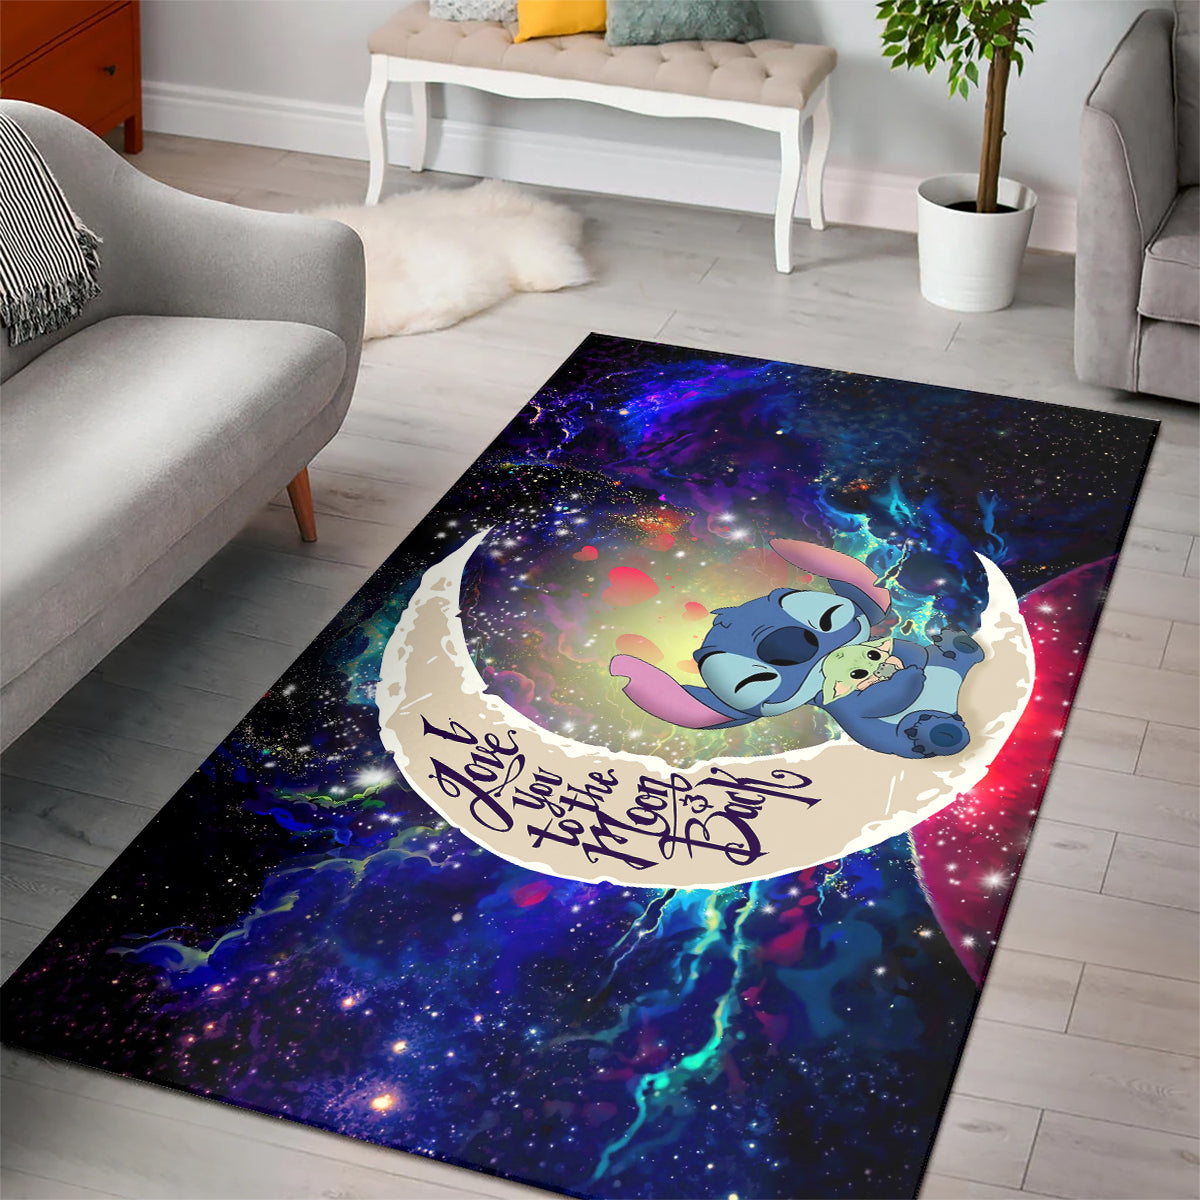 Stitch Hold Baby Yoda Love You To The Moon Galaxy Carpet Rug Home Room Decor